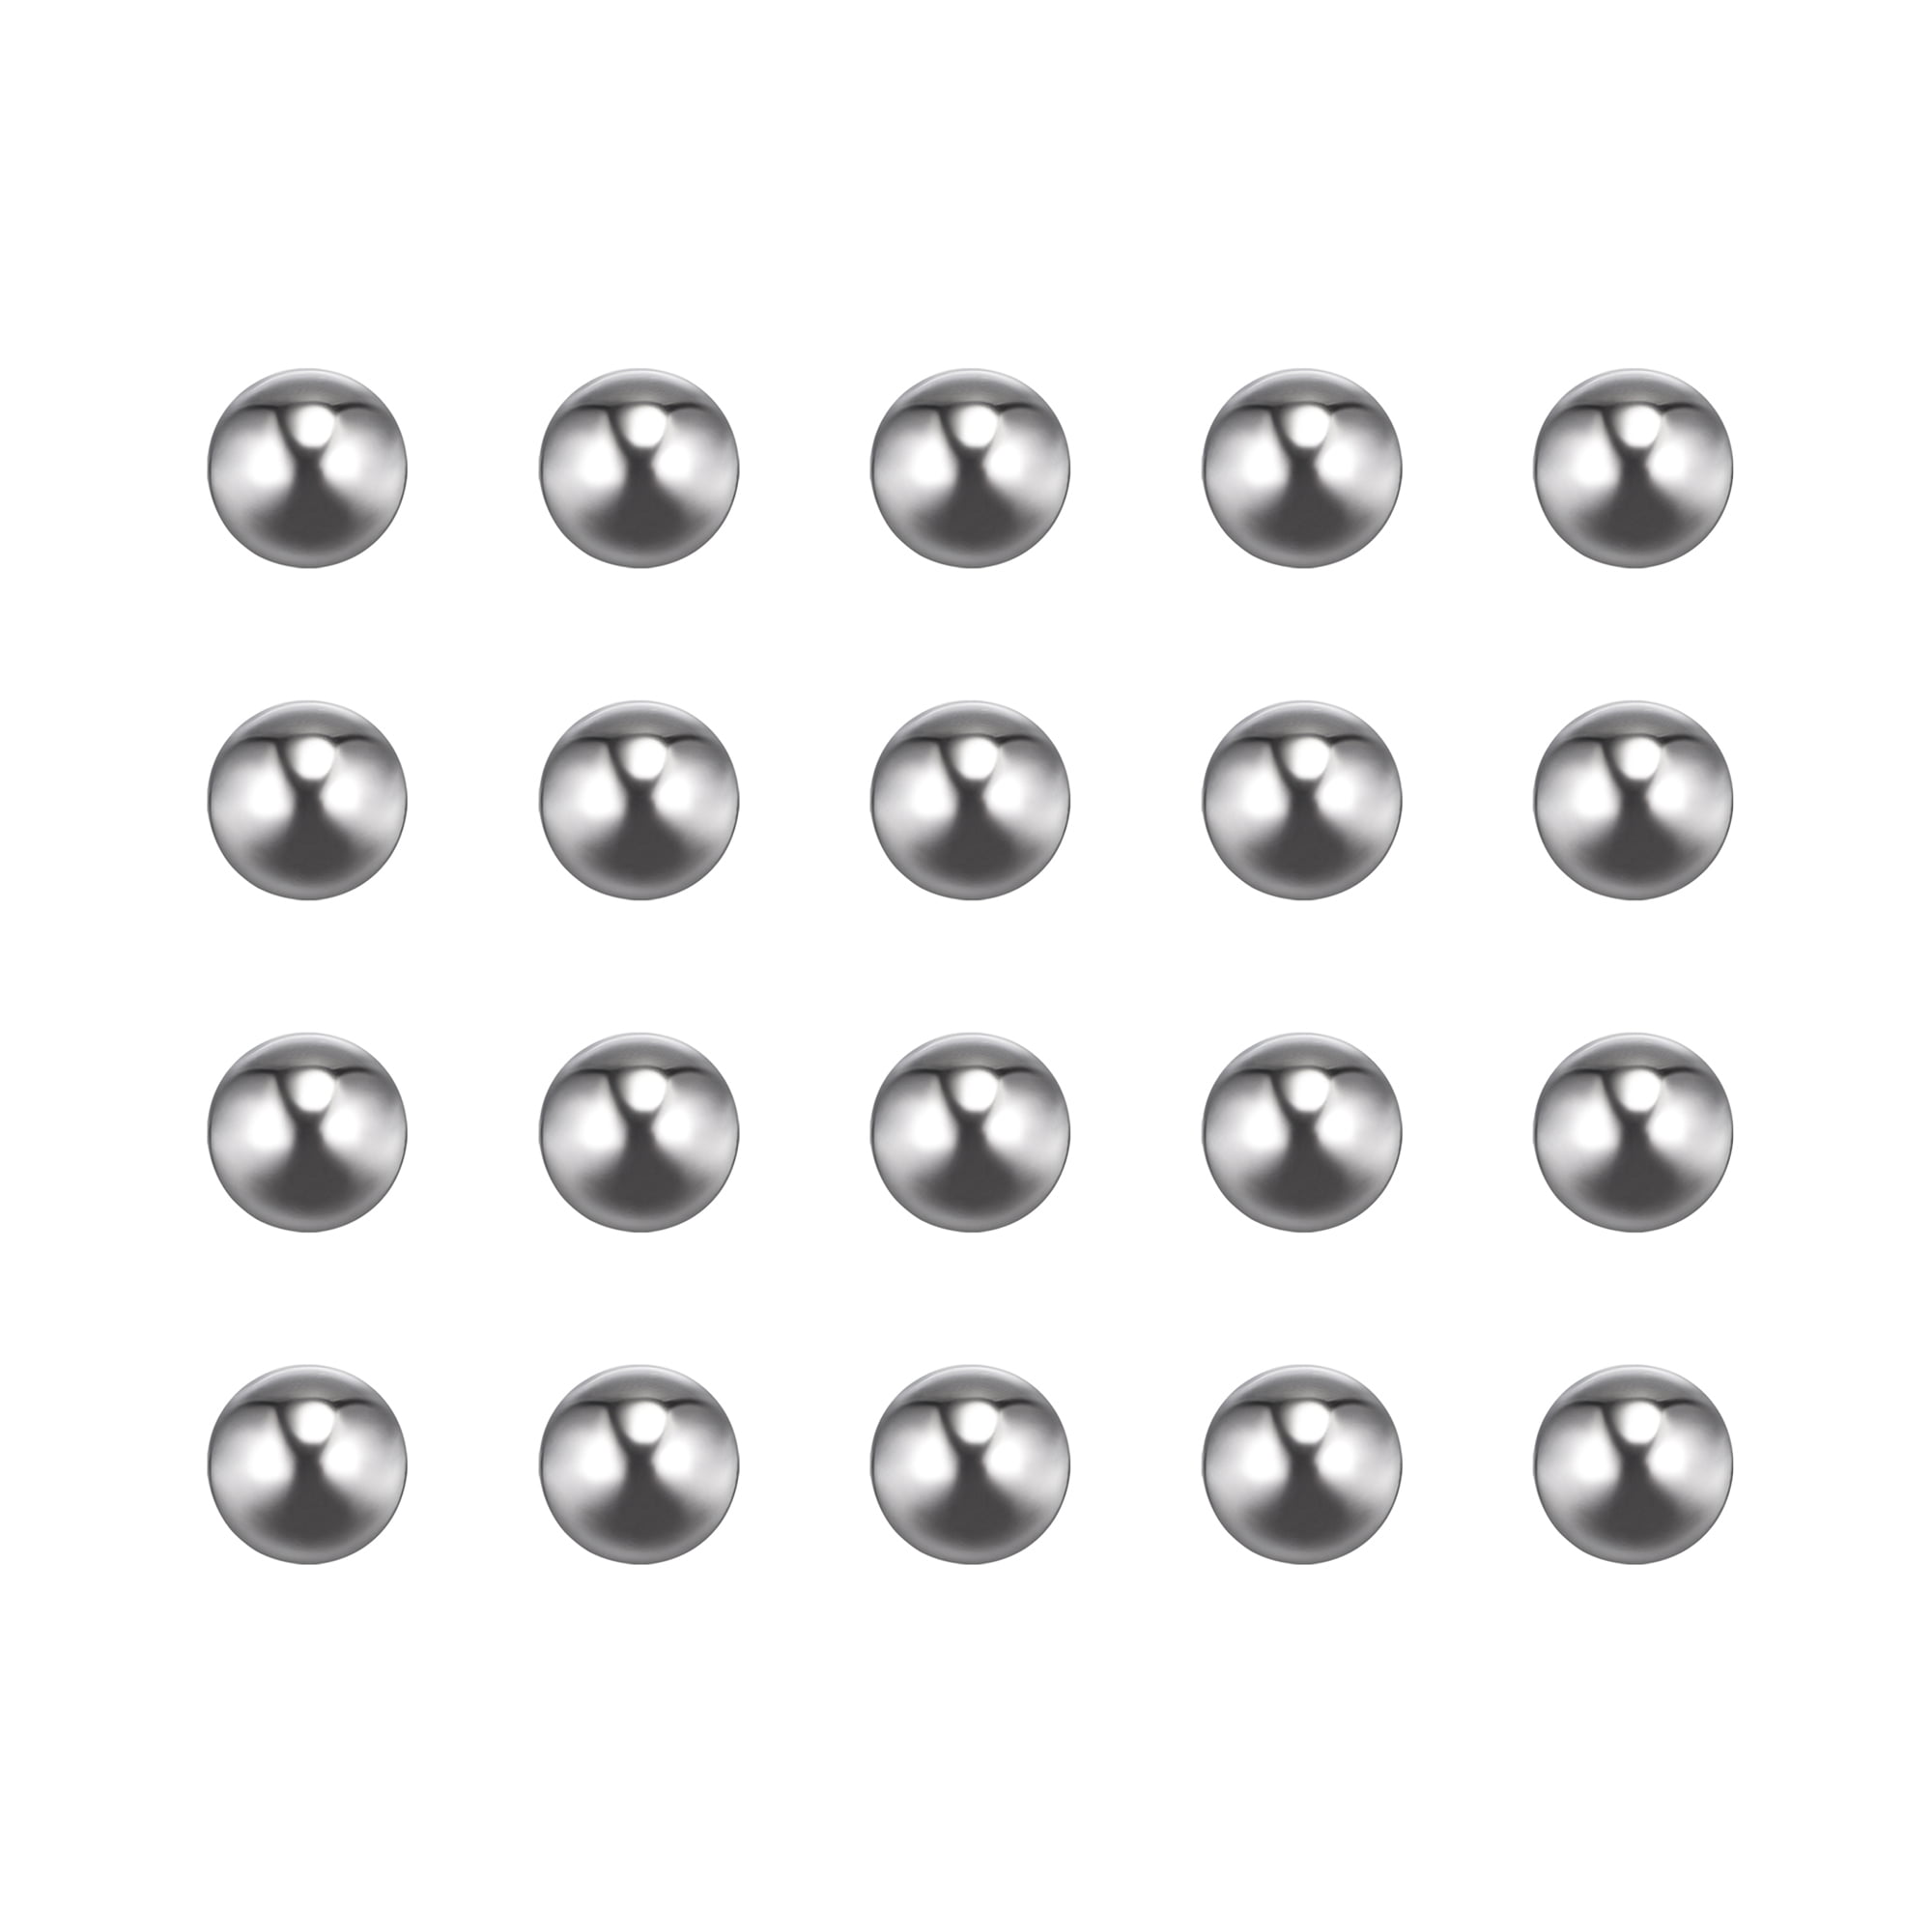 uxcell 600pcs 5mm 201 Stainless Steel Bearing Balls G200 Precision 